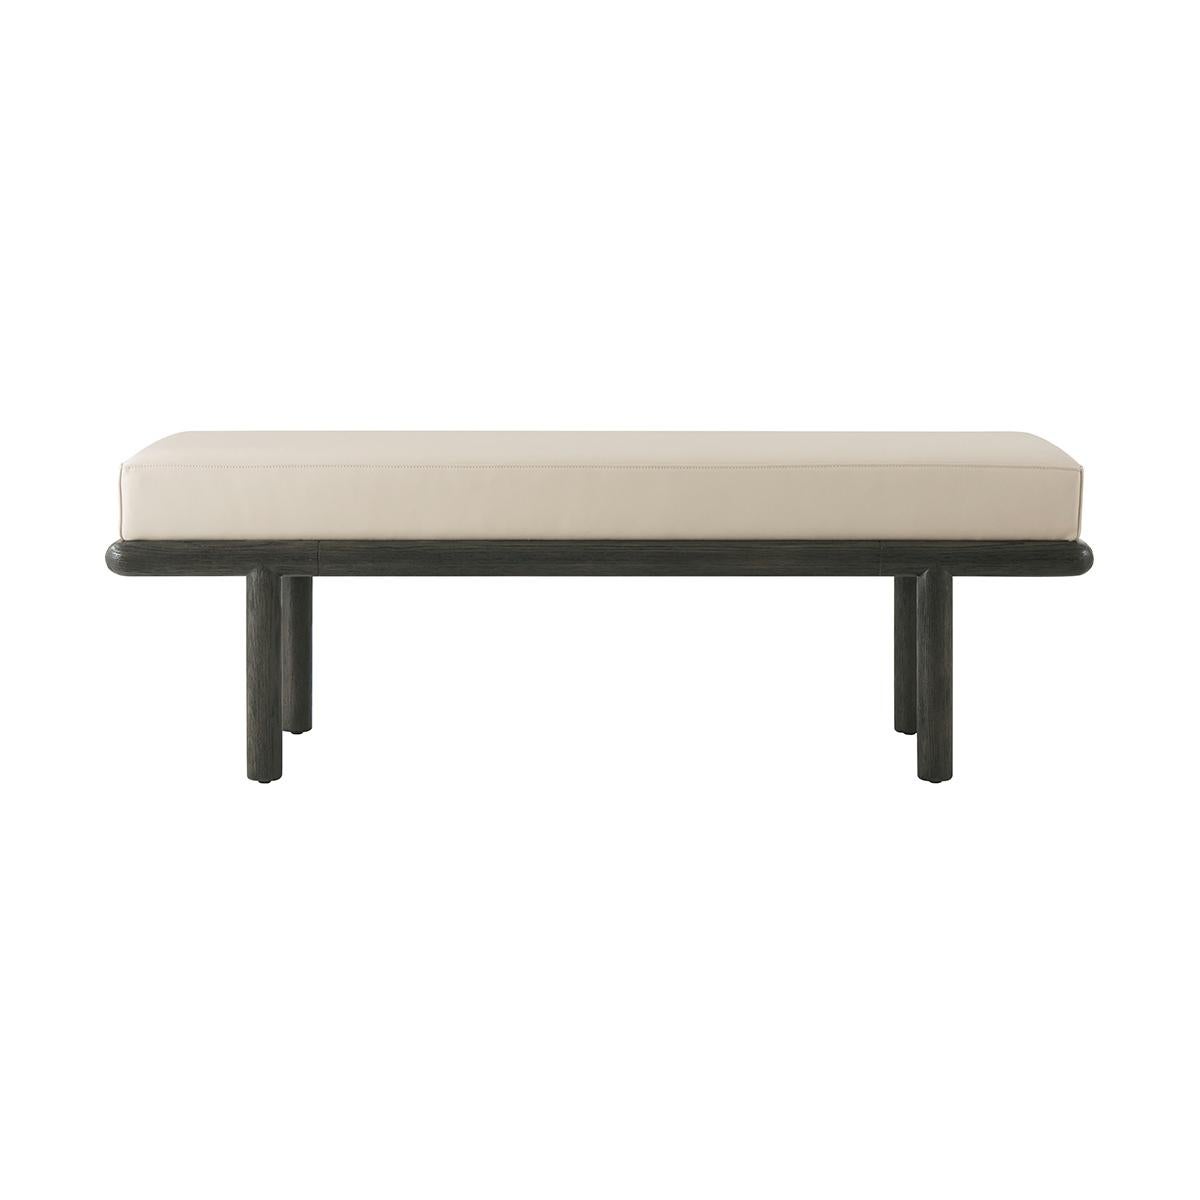 With a boxed leather upholstered cushion, the frame of this naturally designed upholstered bench is skillfully hand-finished with an intensive multi-step process, resulting in a beautifully brushed type of finish making the visible grain from the